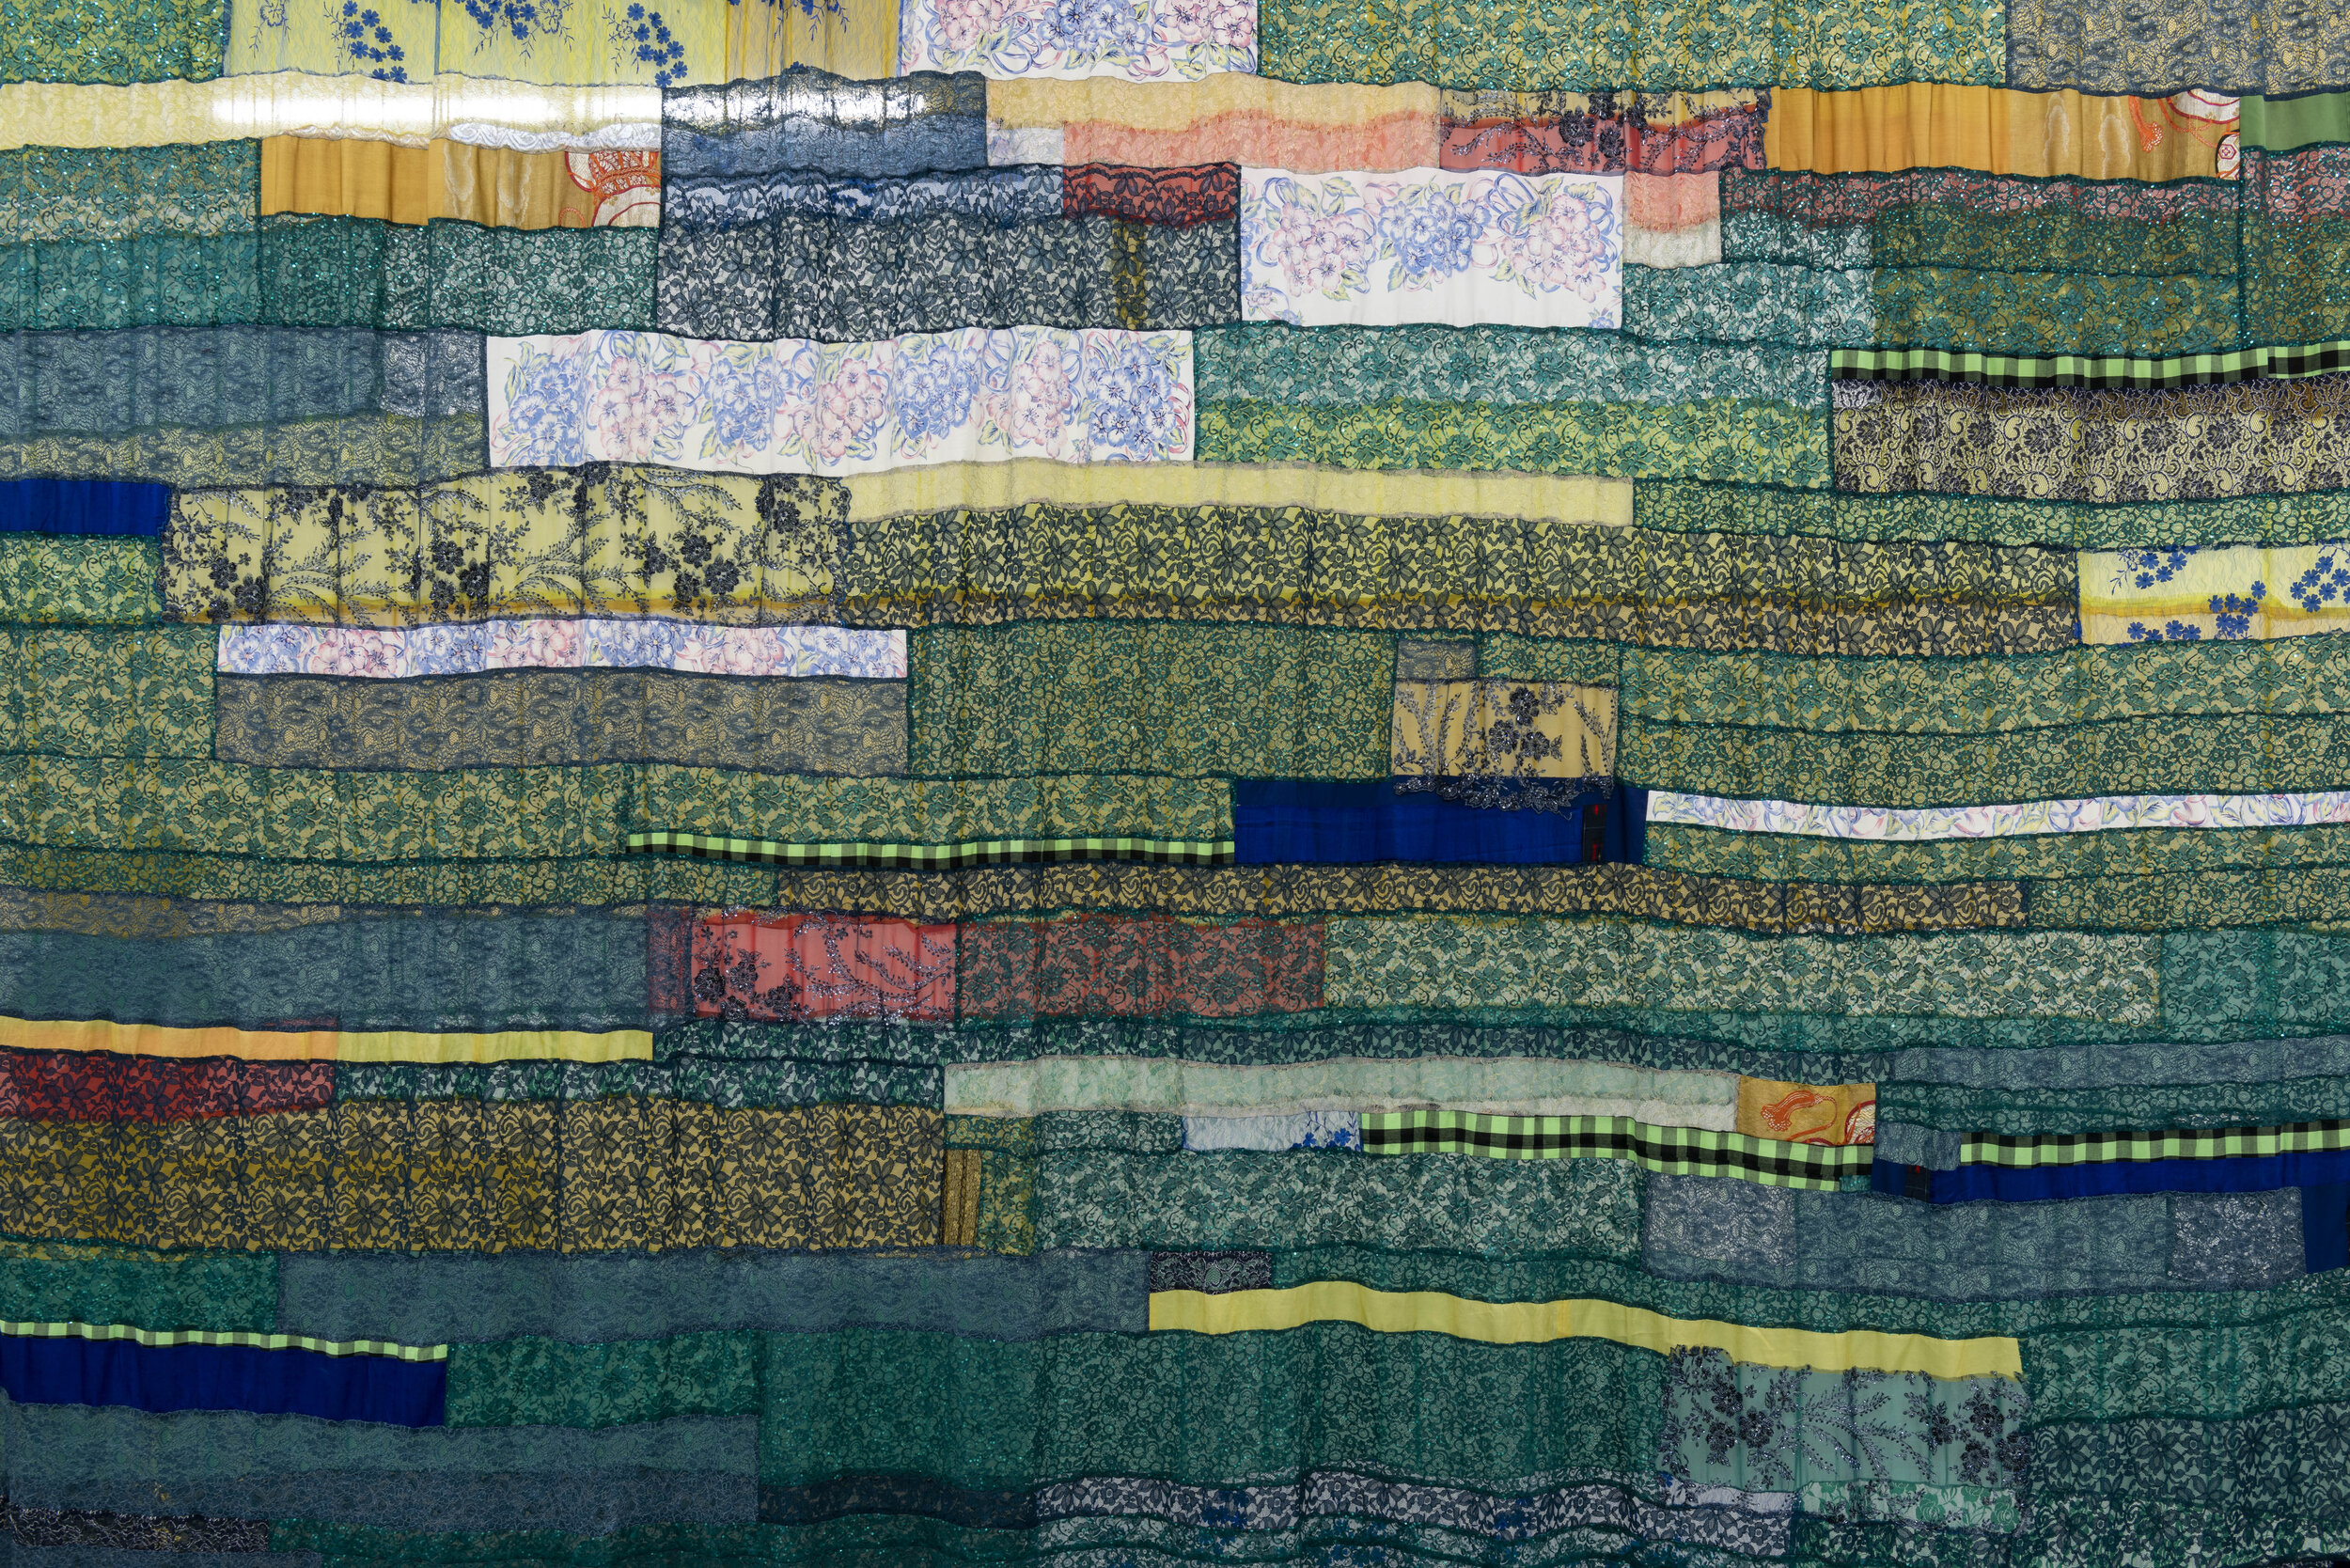  Detail of  Sea of a Thousand Greens , 2018 wool, cotton, polyester, rayon, nylon fabrics, lace, glass beads and sequins 149 1/2 x 166 1/4 x&nbsp; 1/2 in&nbsp; (379.7 x 422.3 x 1.3 cm) 